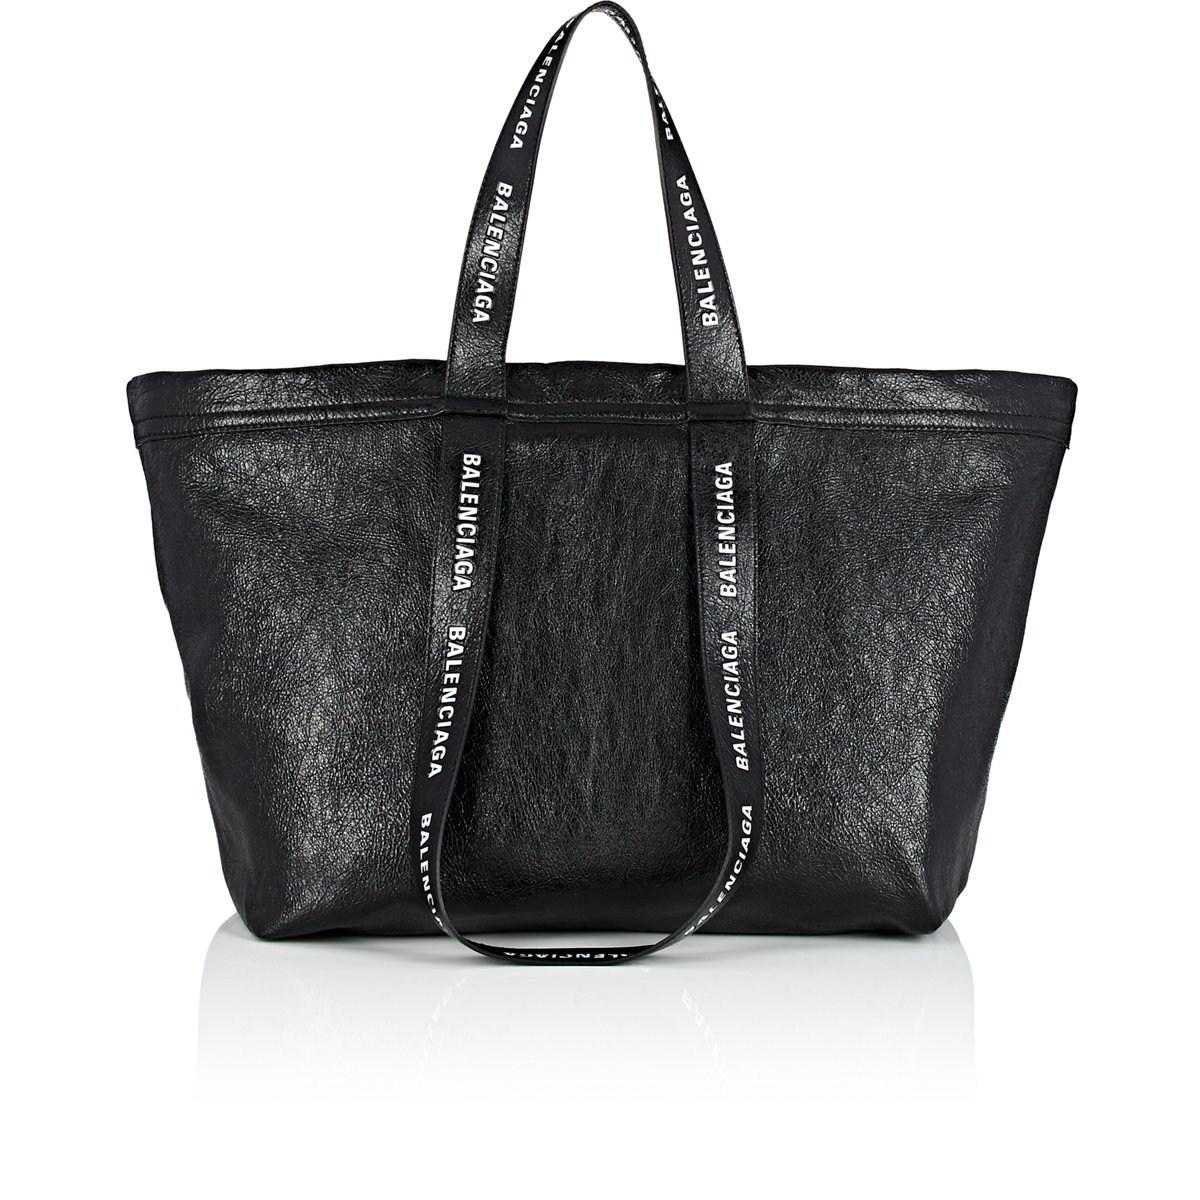 Balenciaga Carry Shopper S Leather Tote Bag in Black for Men - Lyst